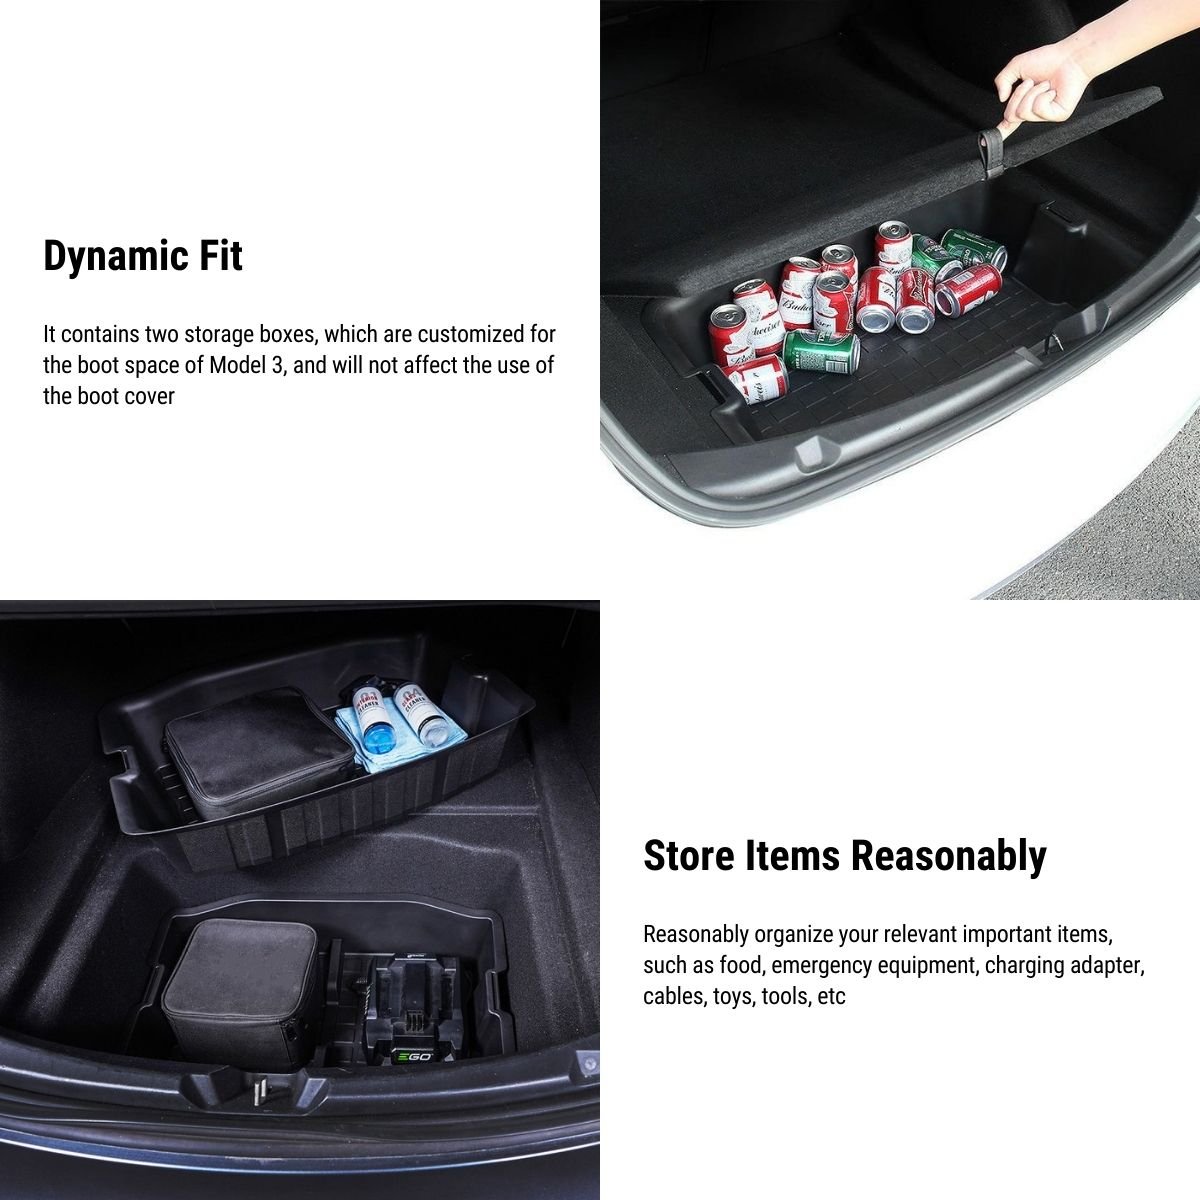 Dual-layer storage box in the front and rear trunk of Tesla Model